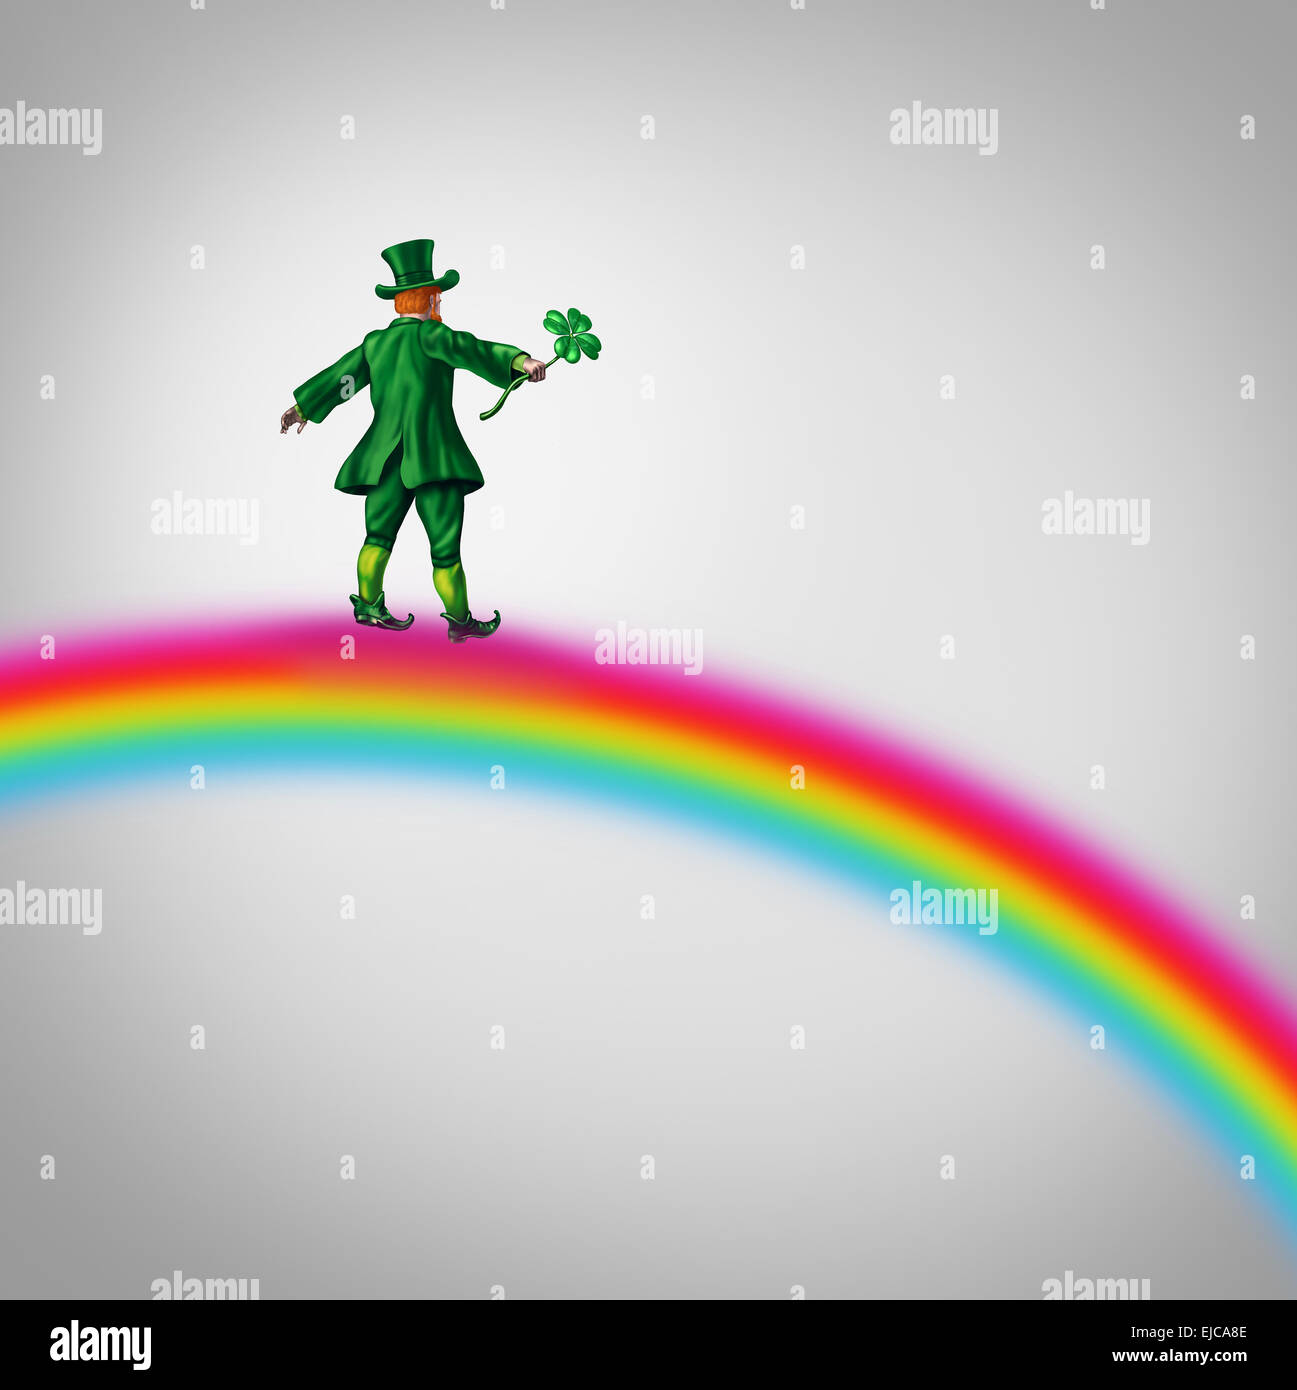 Leprechaun Fortune Rainbow as a small character in a green traditional saint patricks day costume holding a four leaf clover walking on a magical streak of color towards a lucky reward. Stock Photo